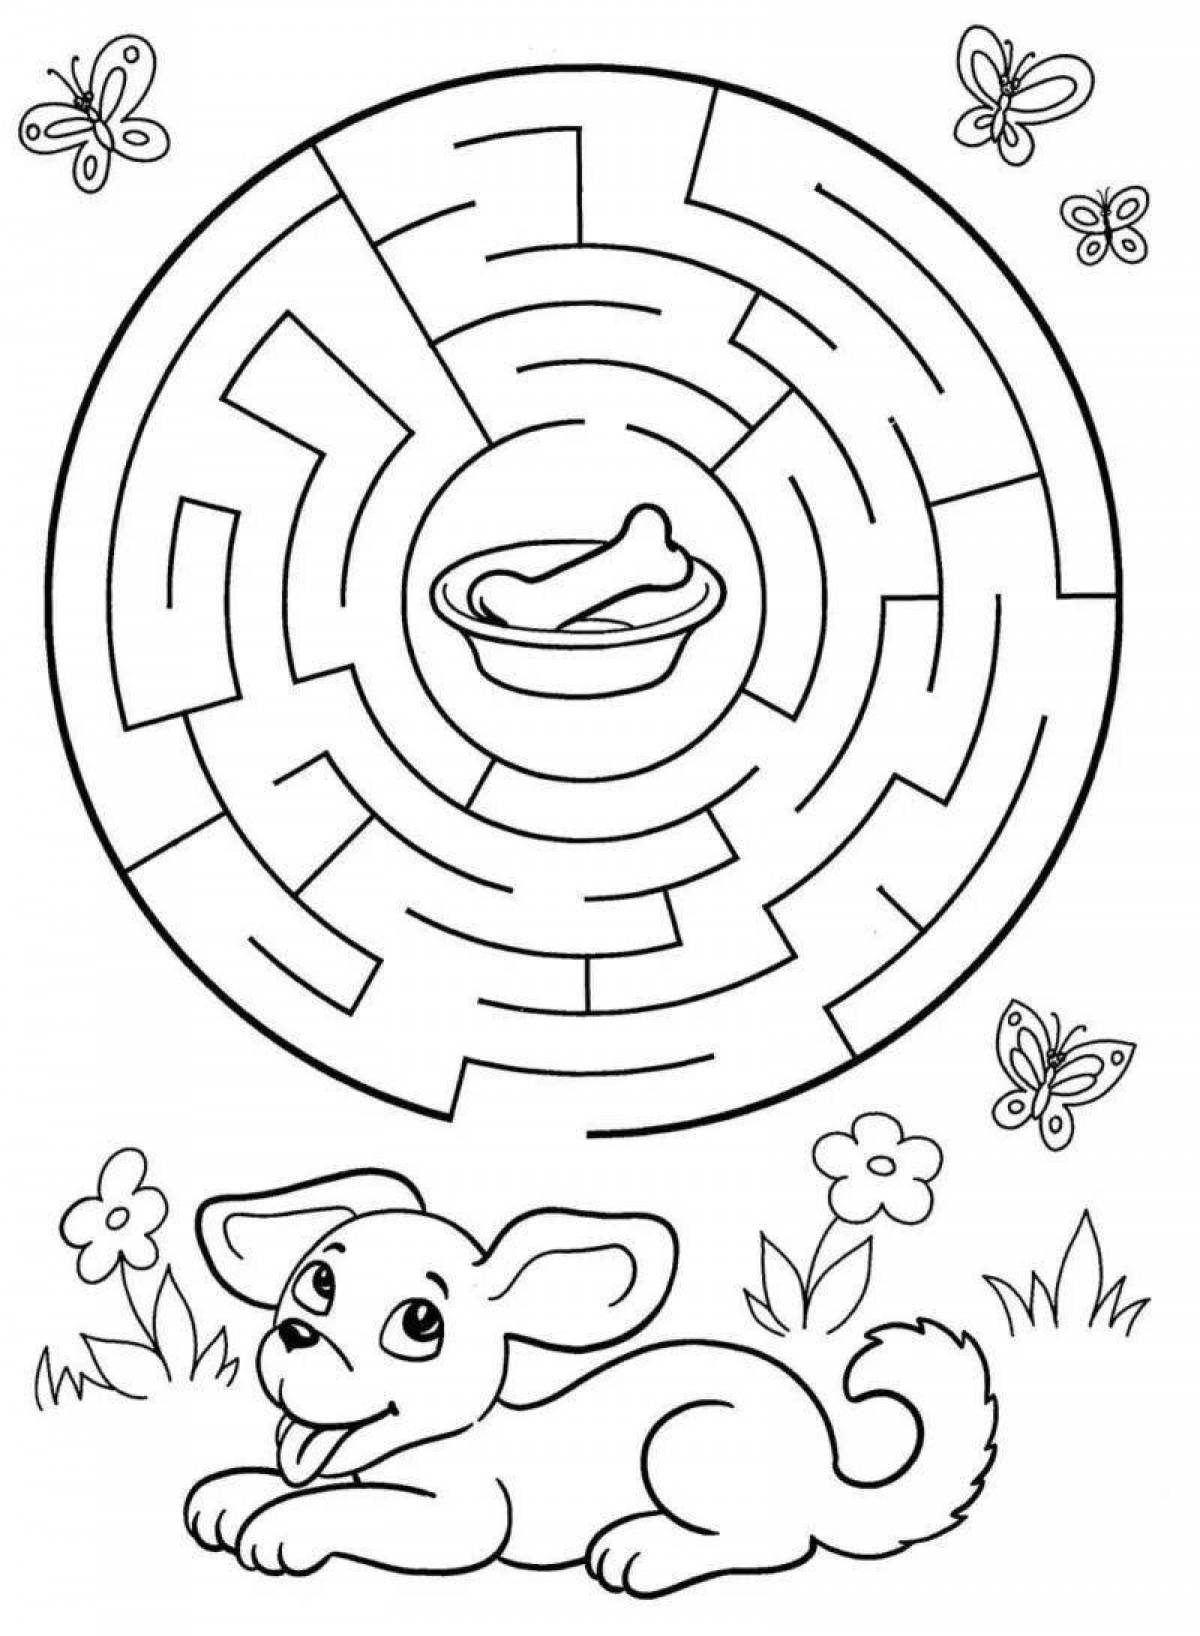 Outstanding maze coloring book for 7 year olds